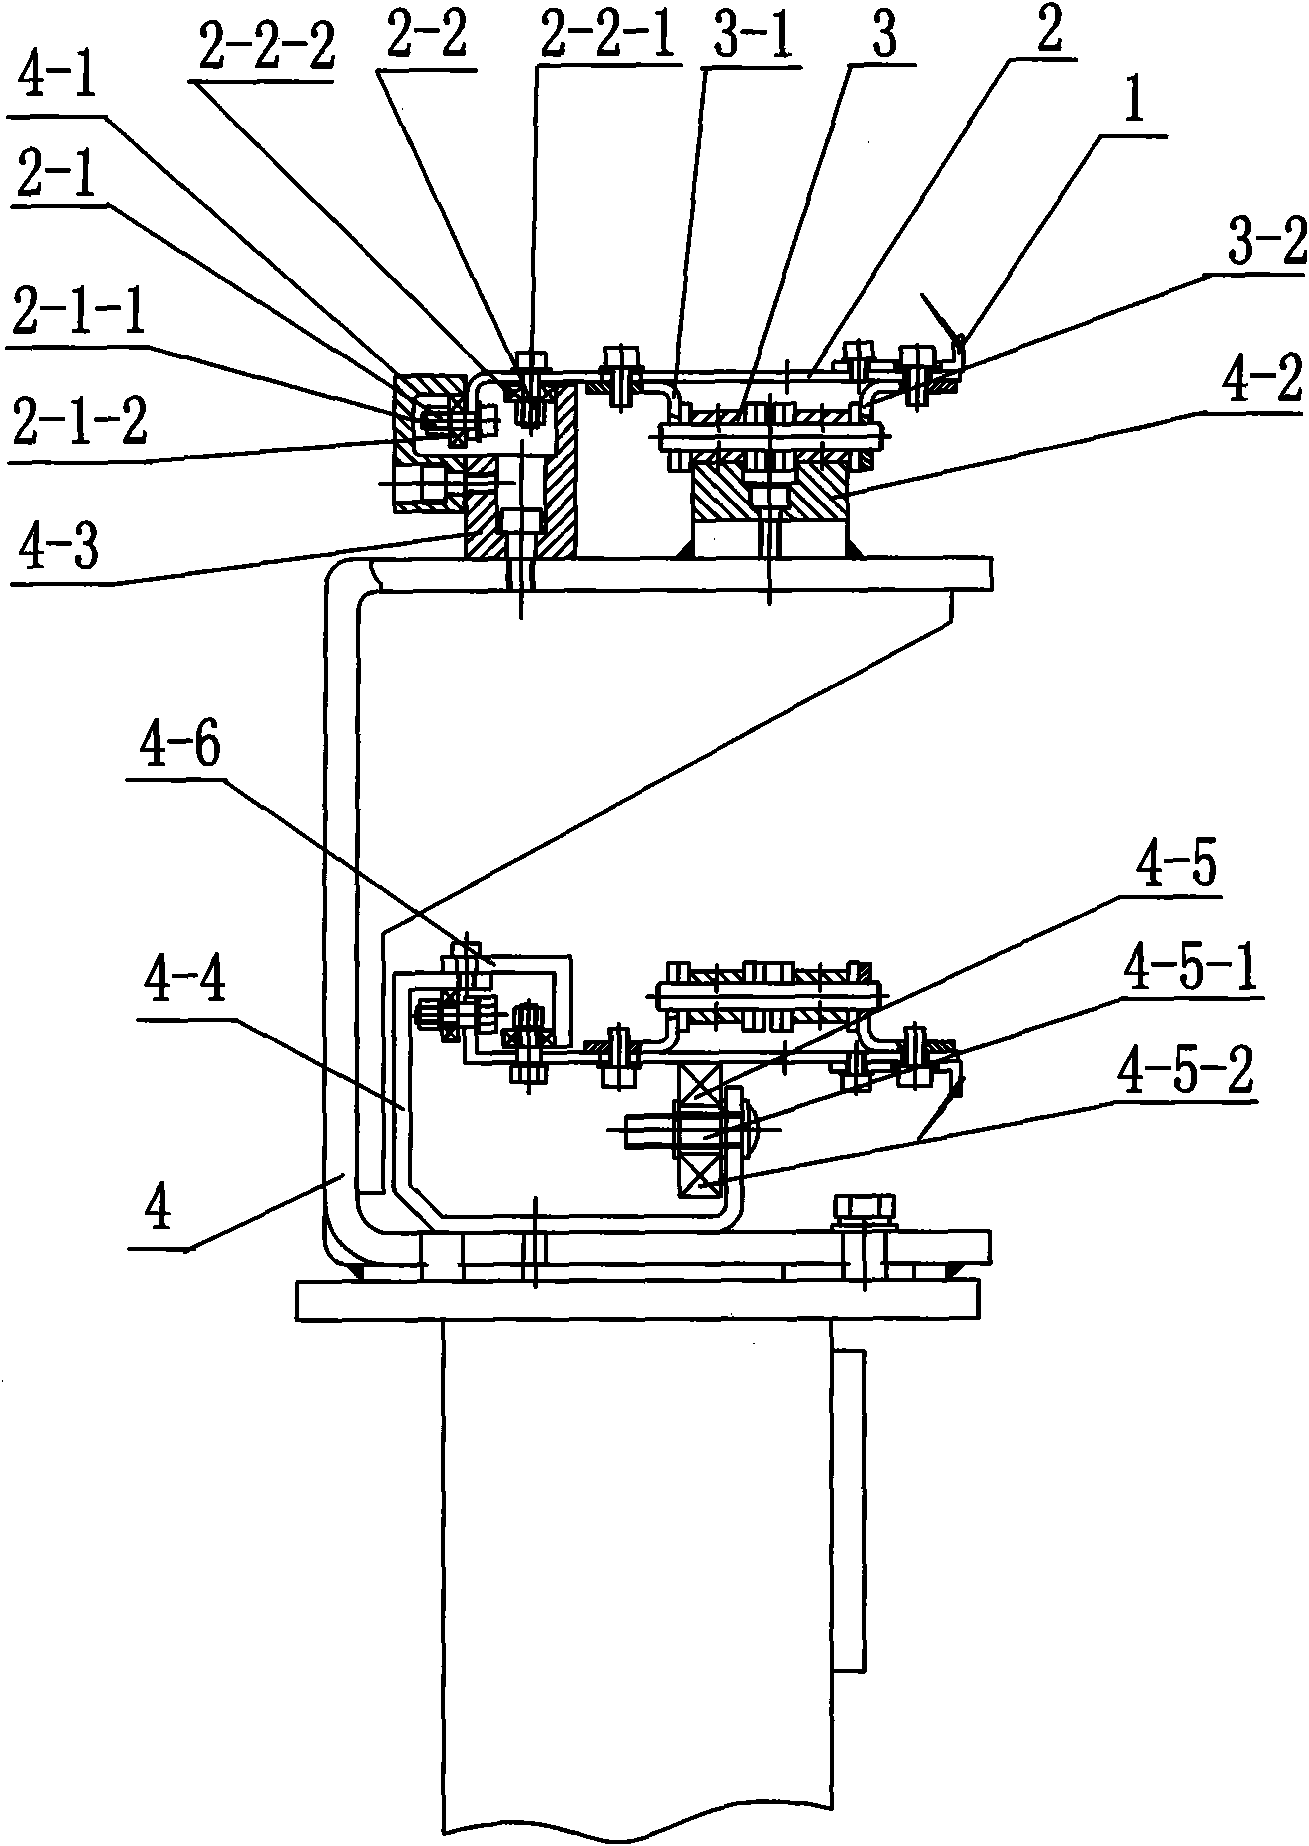 Multi-axial chain device for warp knitting machine